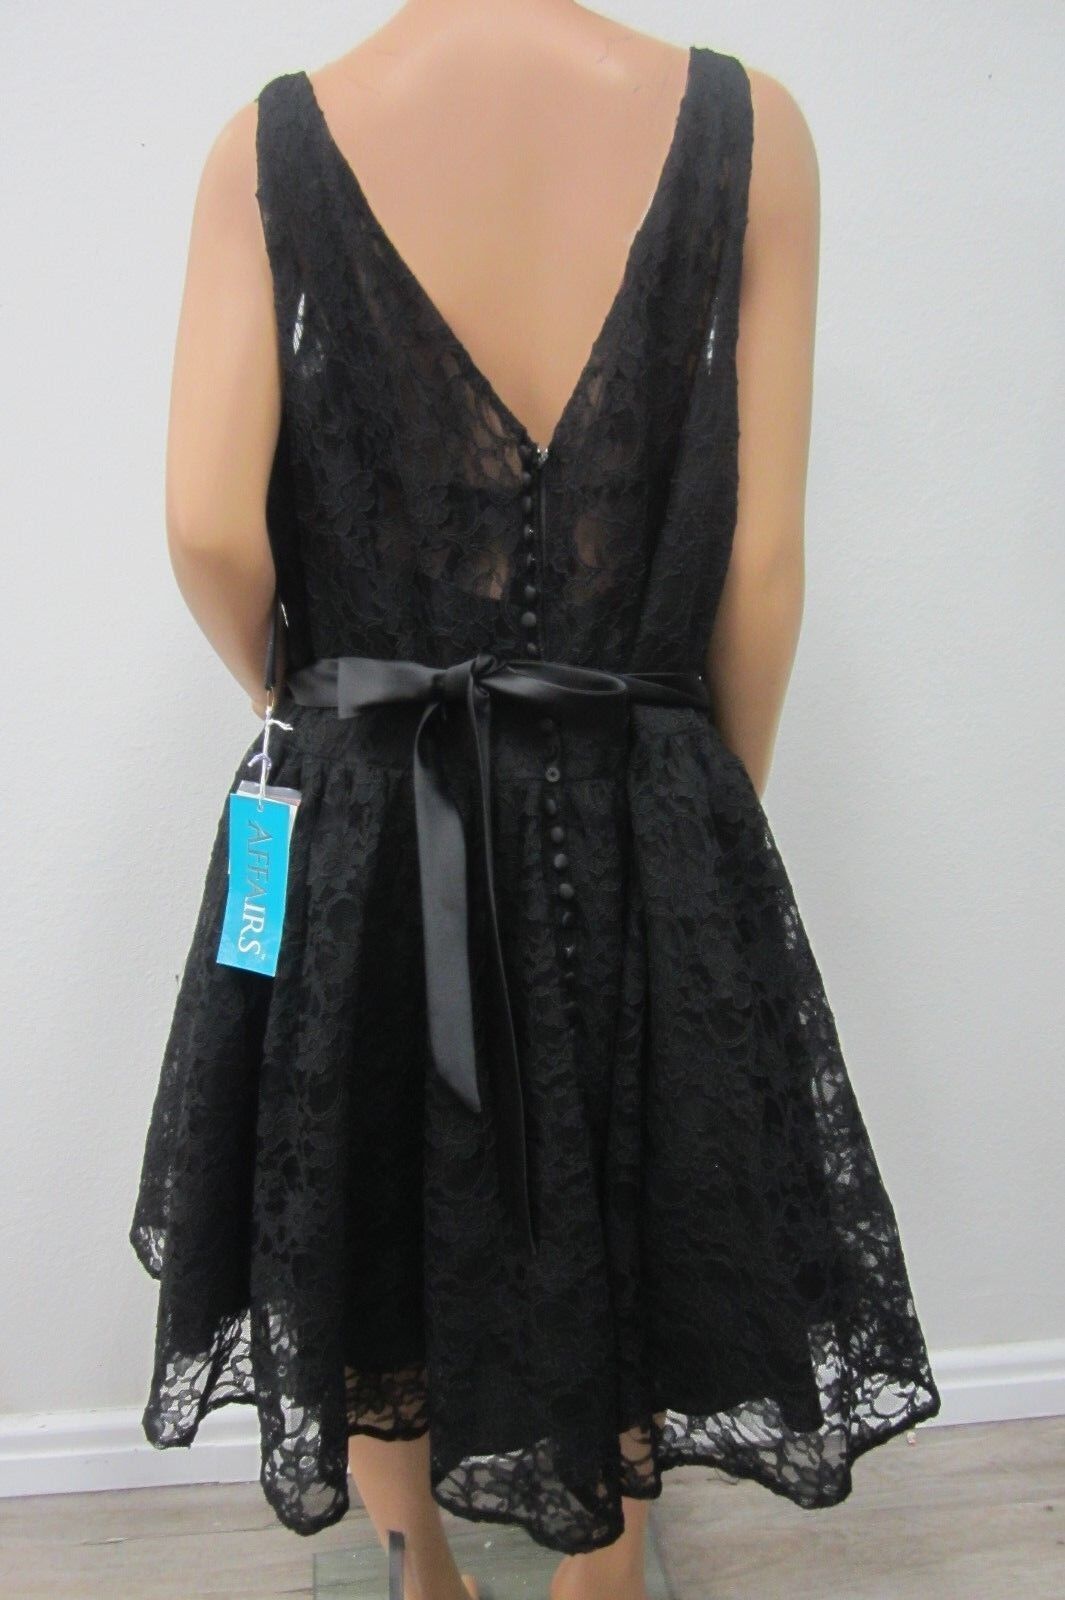 *STUNNING*  NWT Mori Lee Mid Calf Black Lace Dress by Affairs Size 28